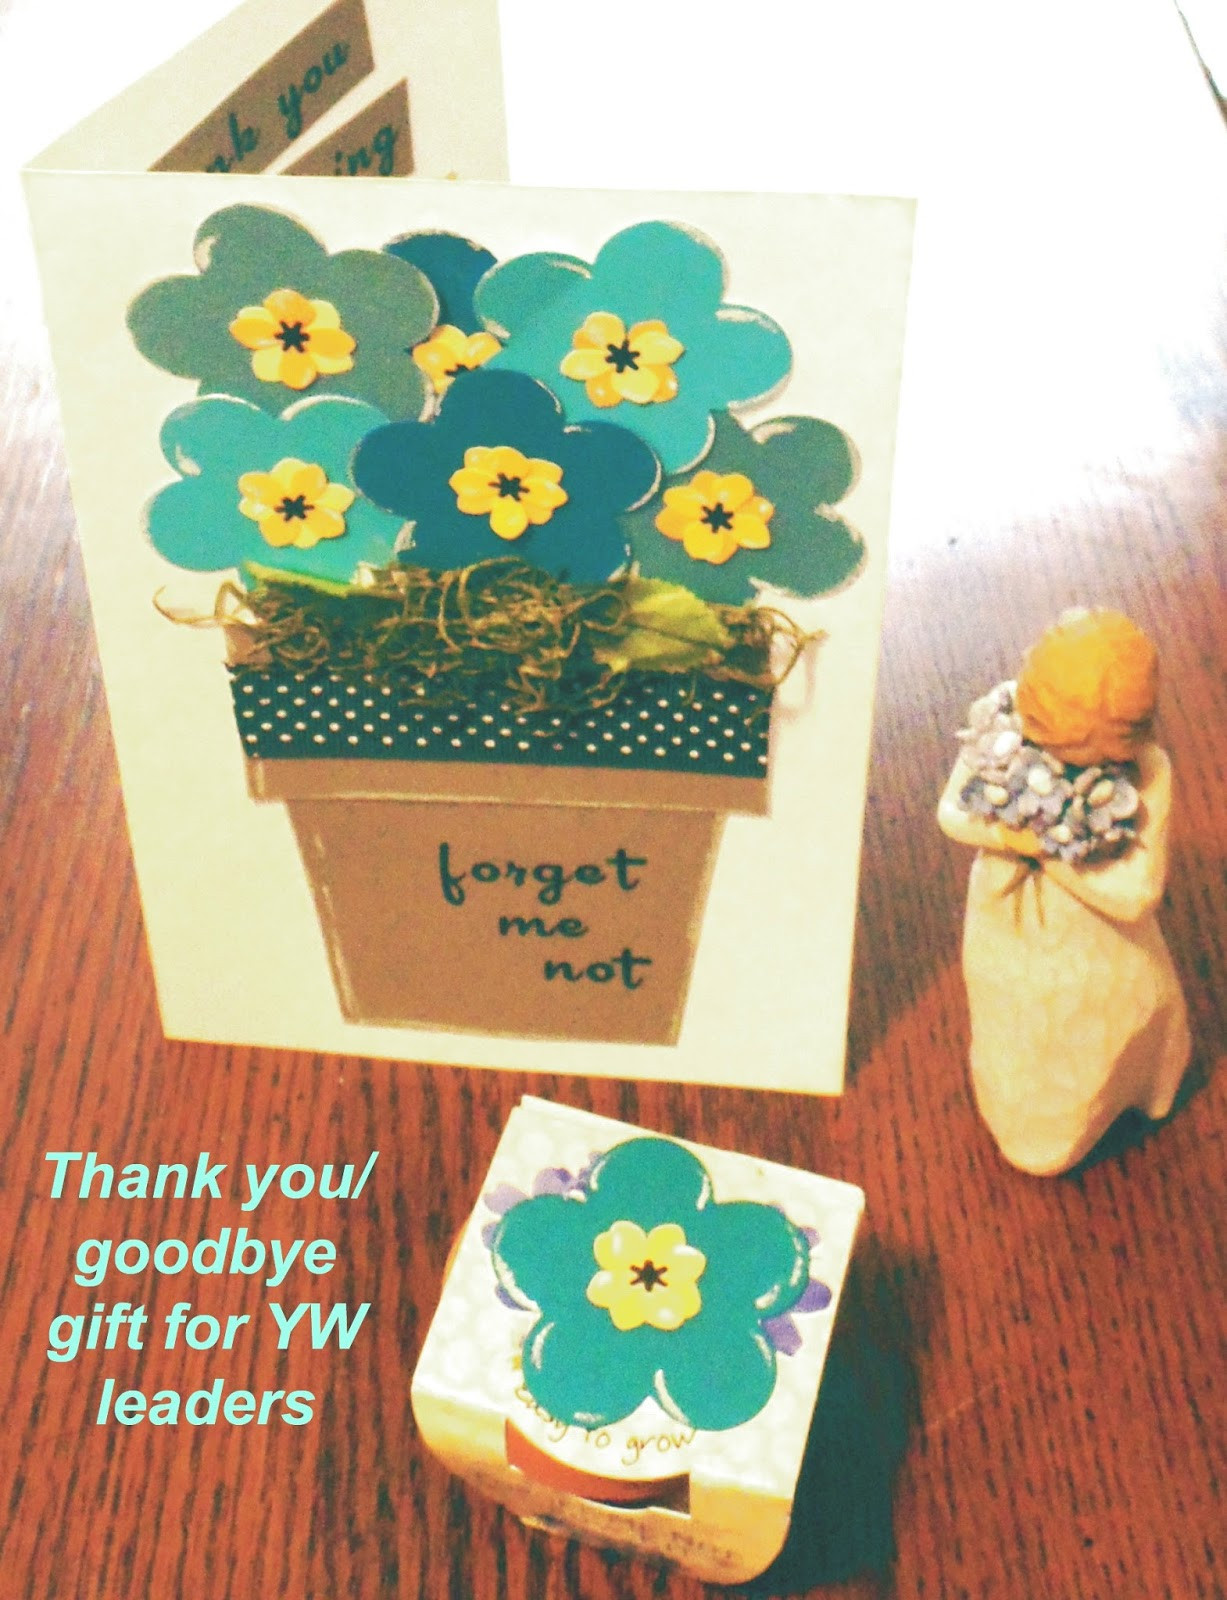 Thank You Gift Ideas For Women
 The top 21 Ideas About Thank You Gift Ideas for Women